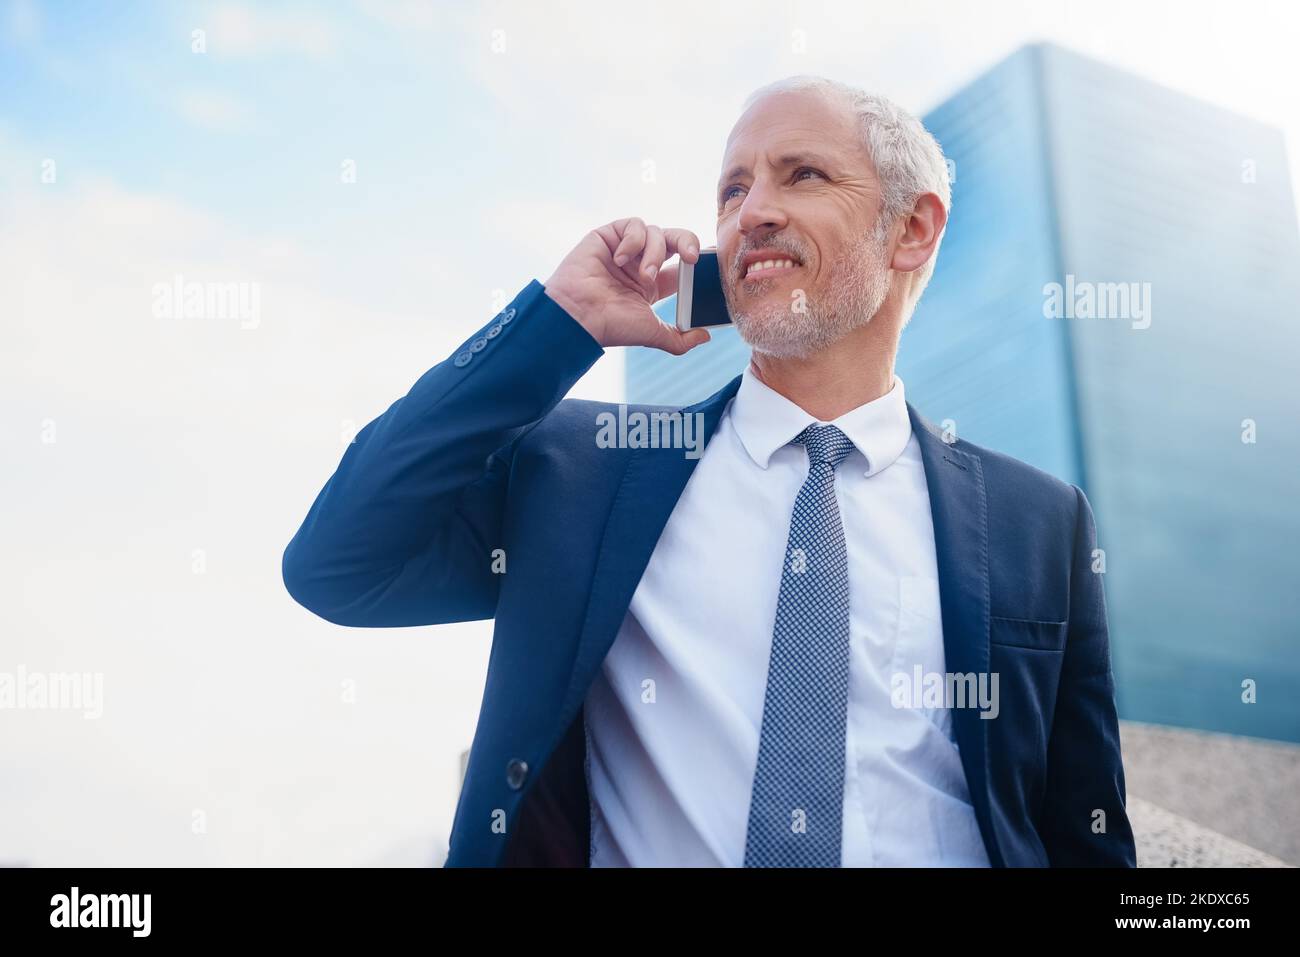 Connected to his business on the go. a businessman answering his phone while walking to his office in the city. Stock Photo